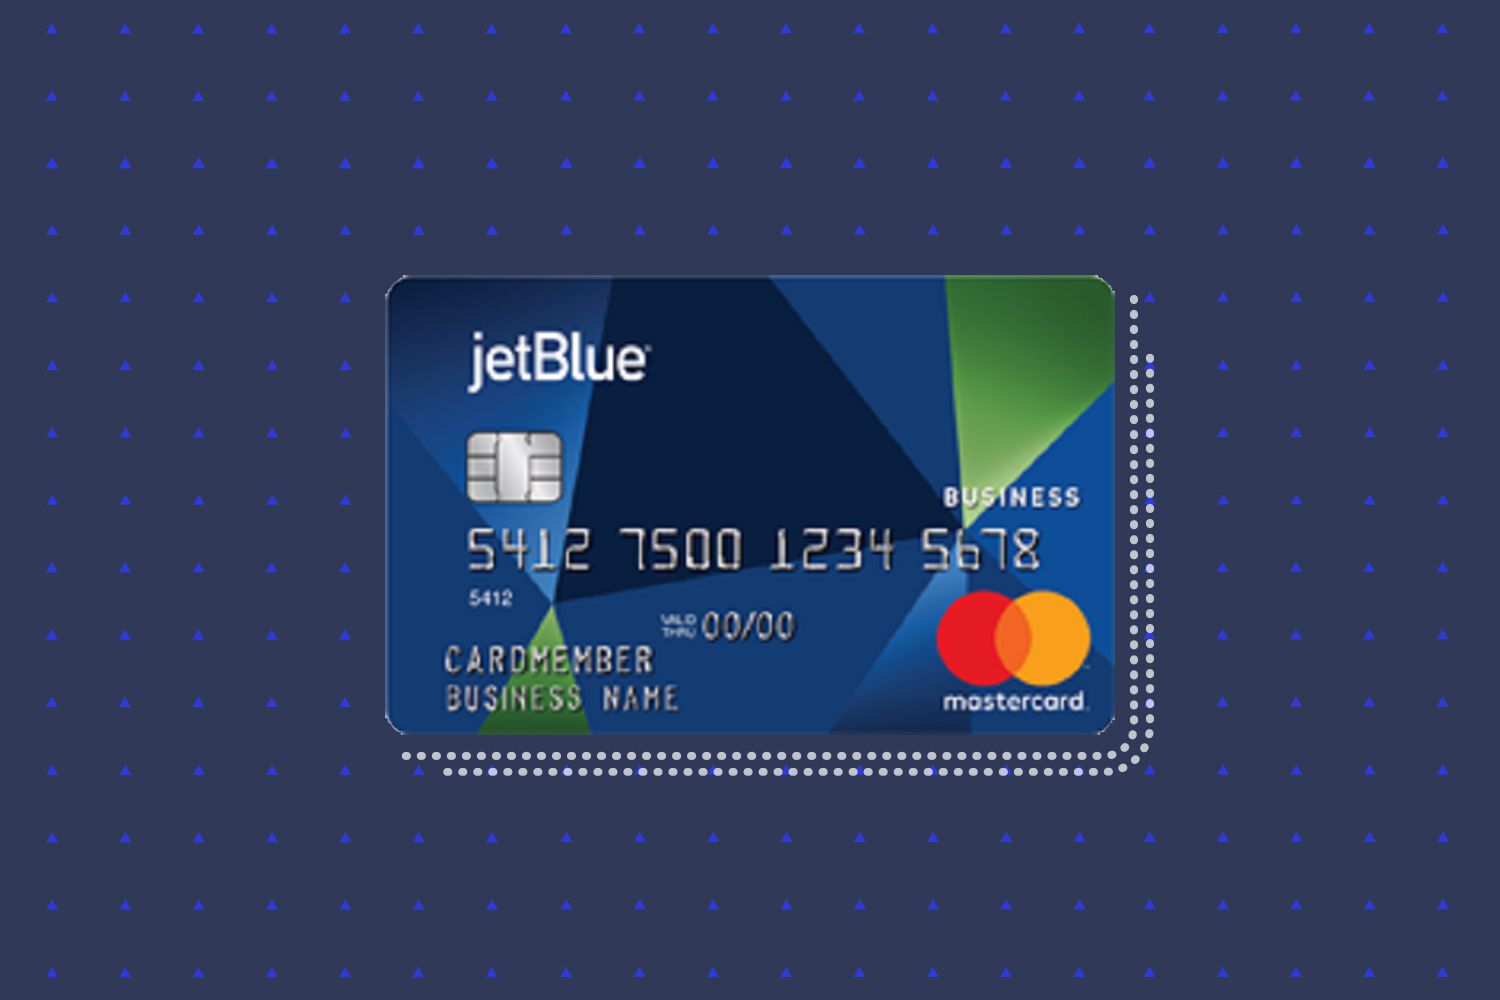 What Credit Score Do You Need For Jetblue Card